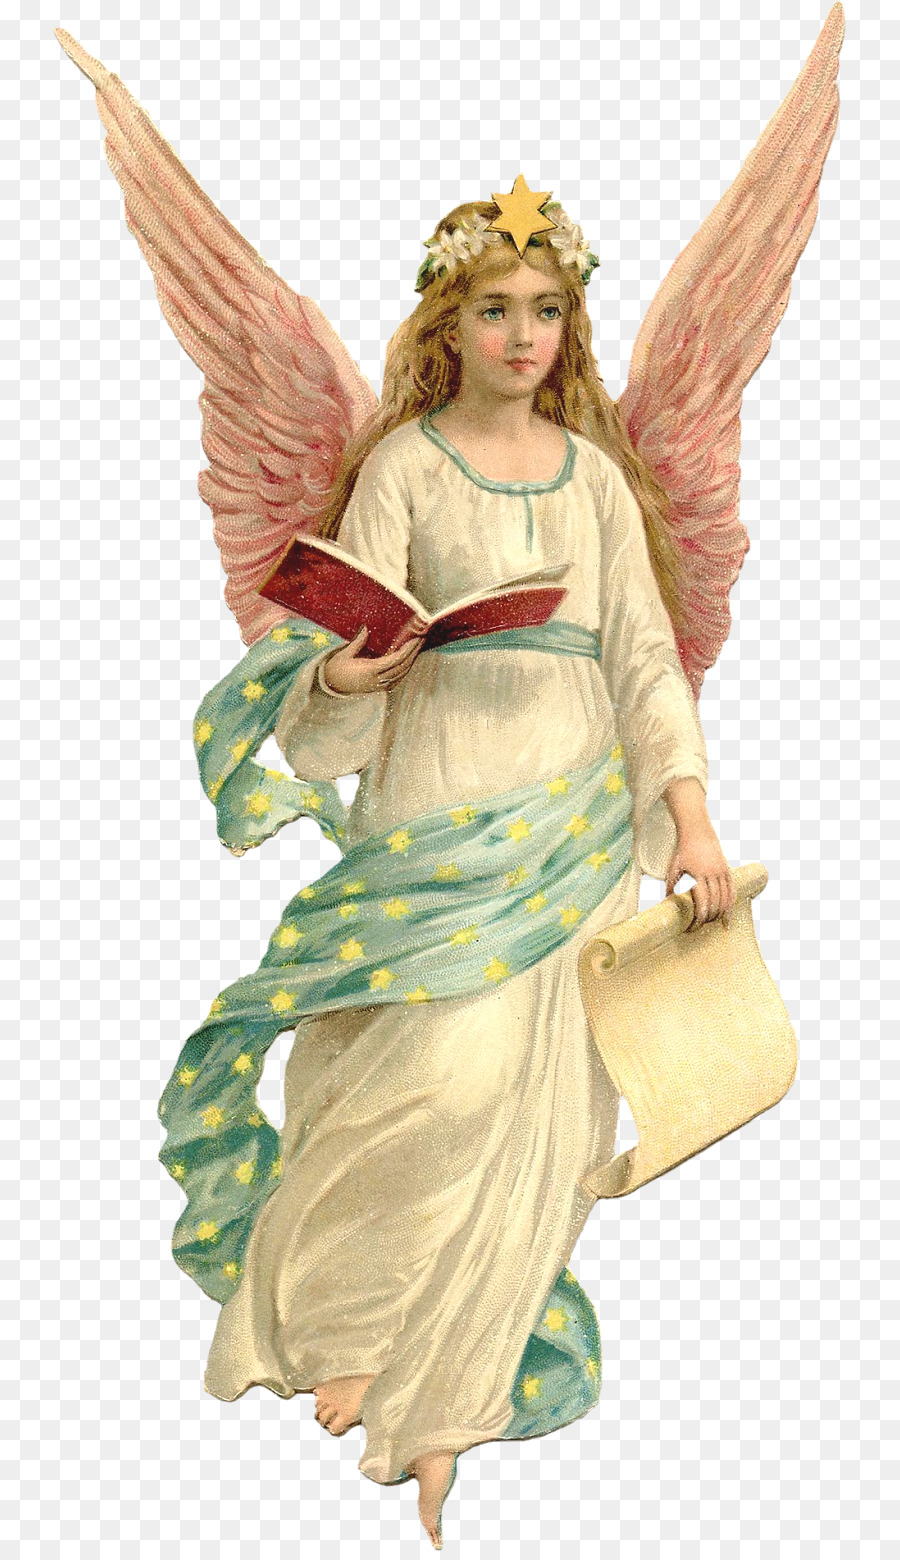 Portable Network Graphics Clip art Image Transparency 3D computer graphics - victorian angels pillow png download - 793*1551 - Free Transparent 3D Computer Graphics png Download.